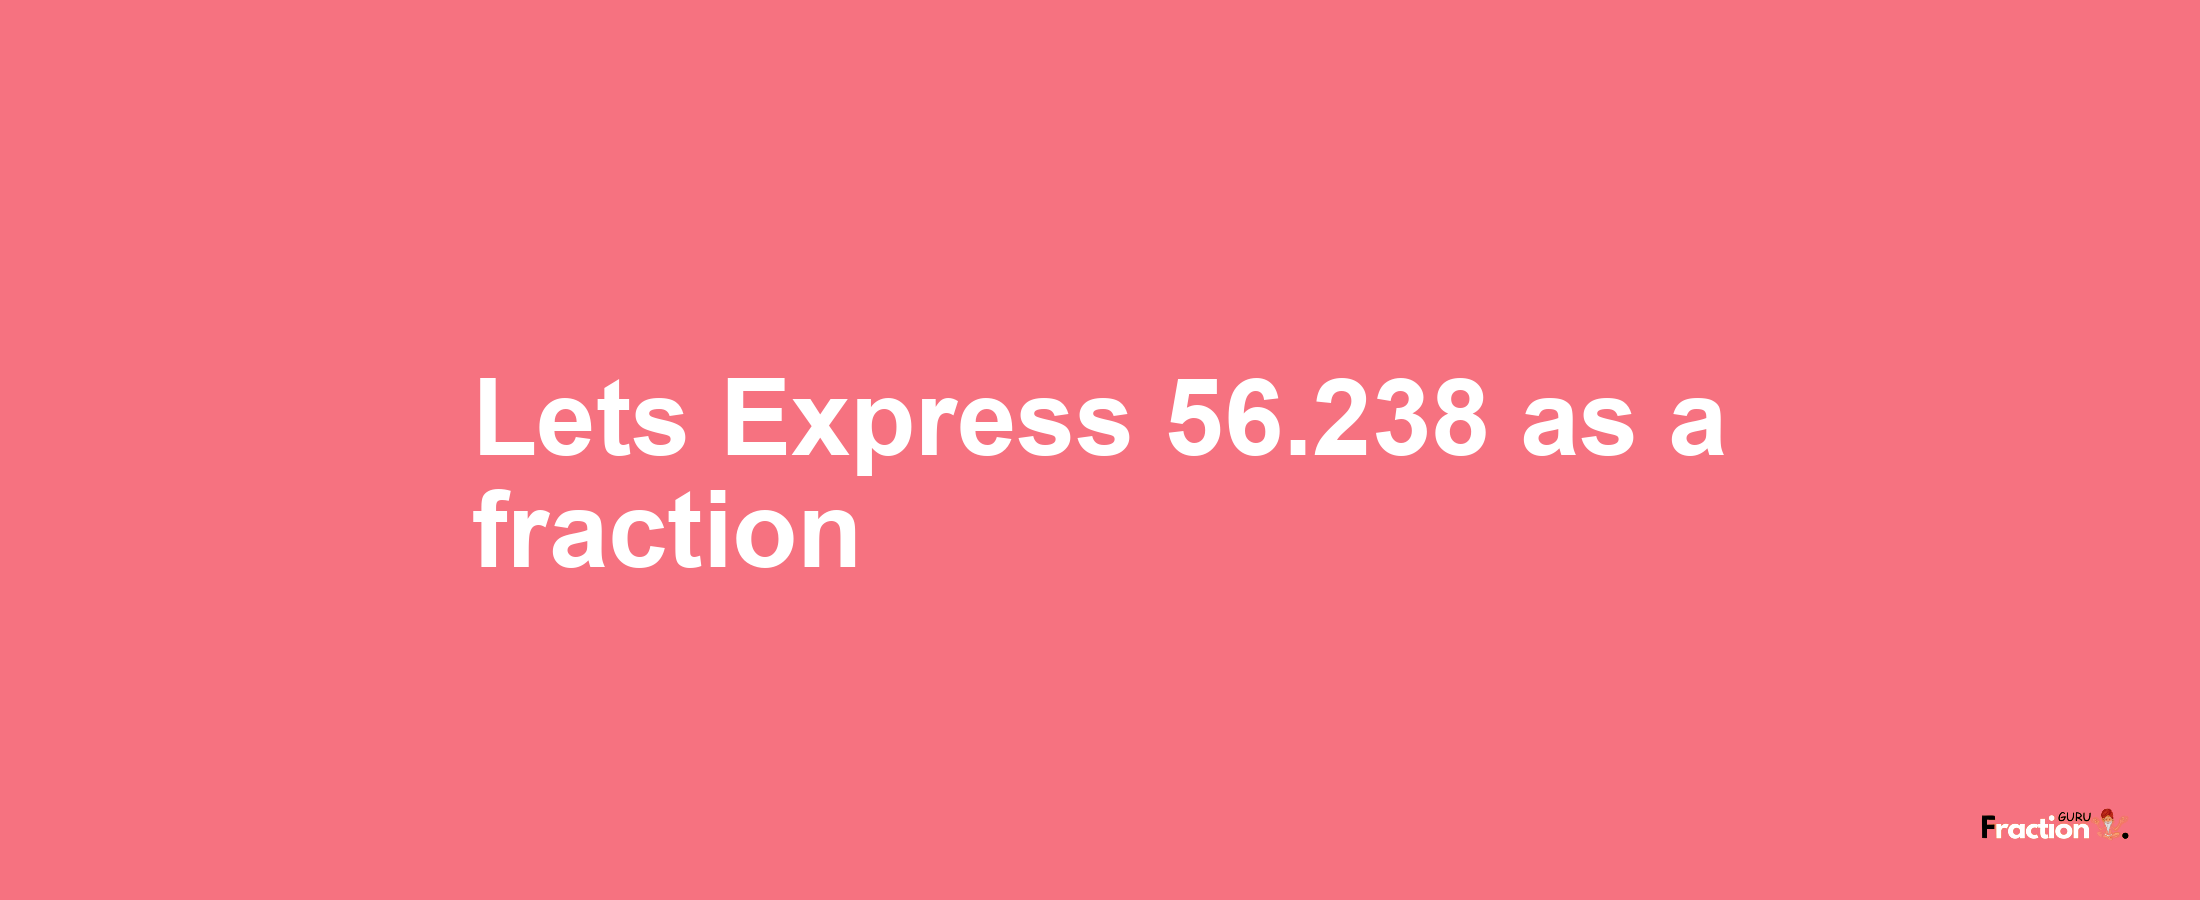 Lets Express 56.238 as afraction